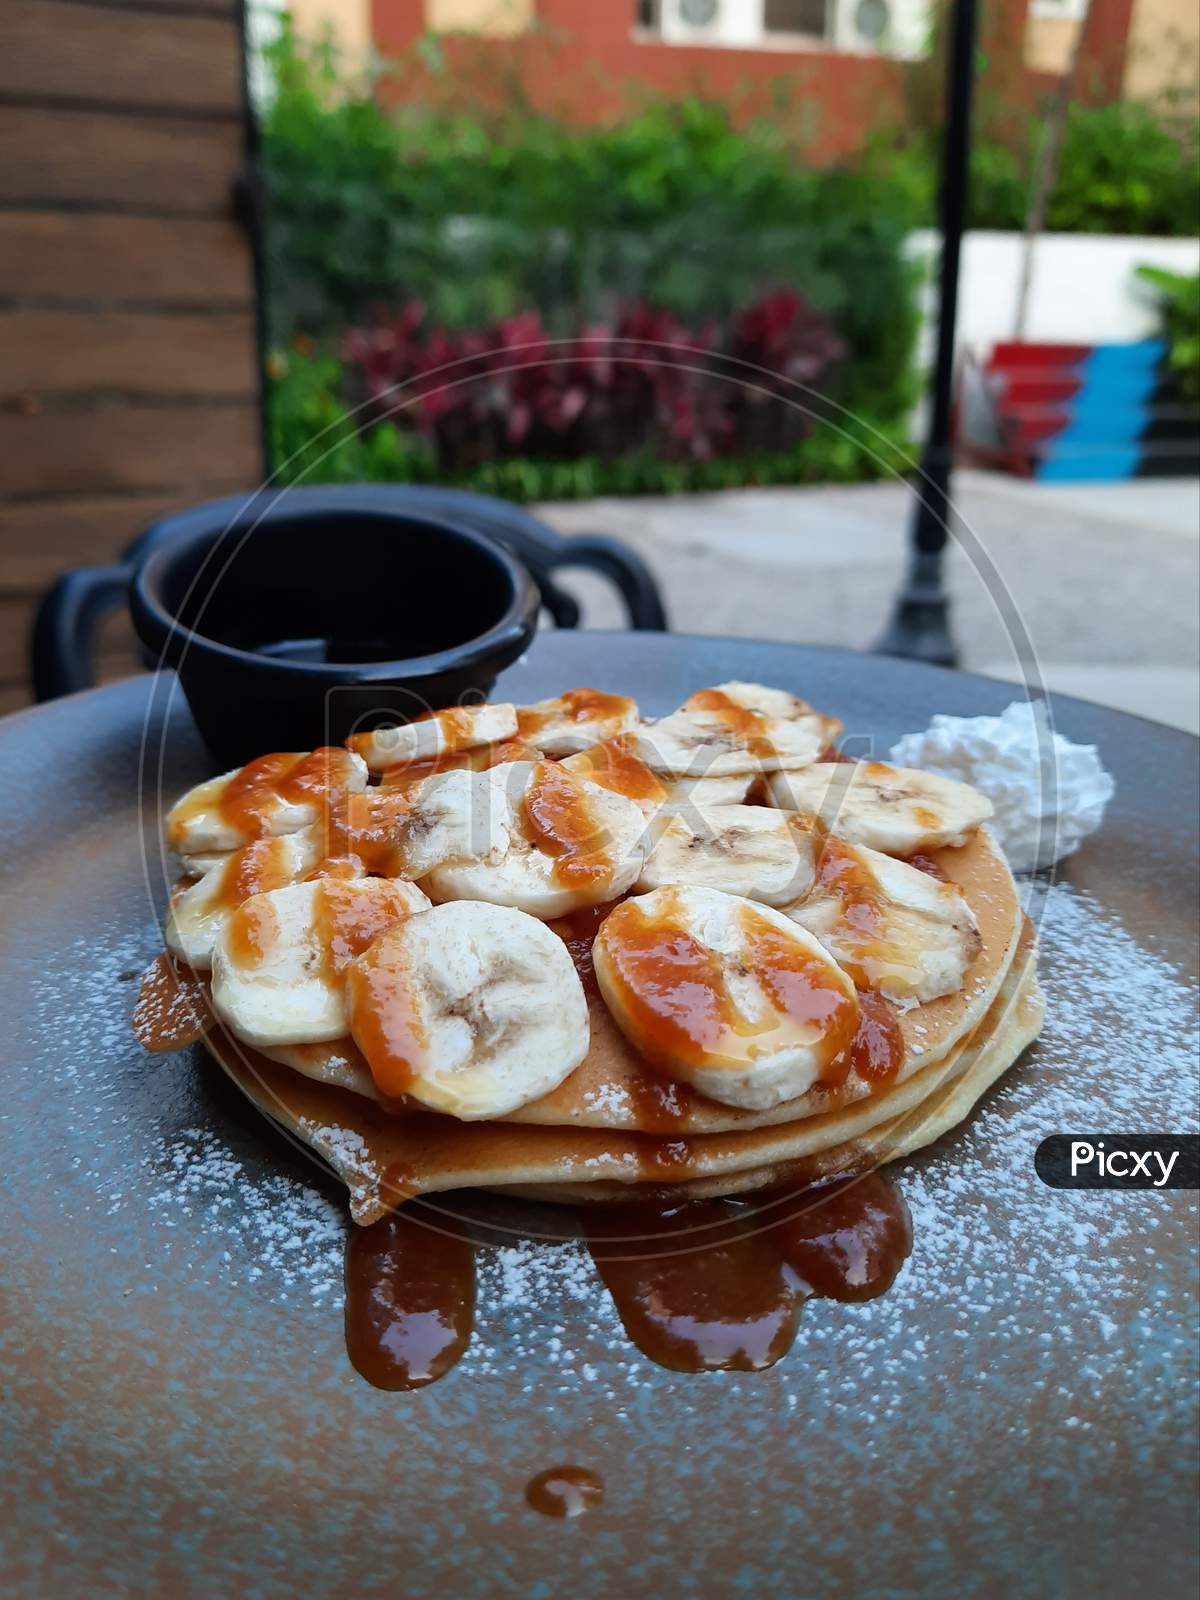 Banana Pancakes with Maple syrup